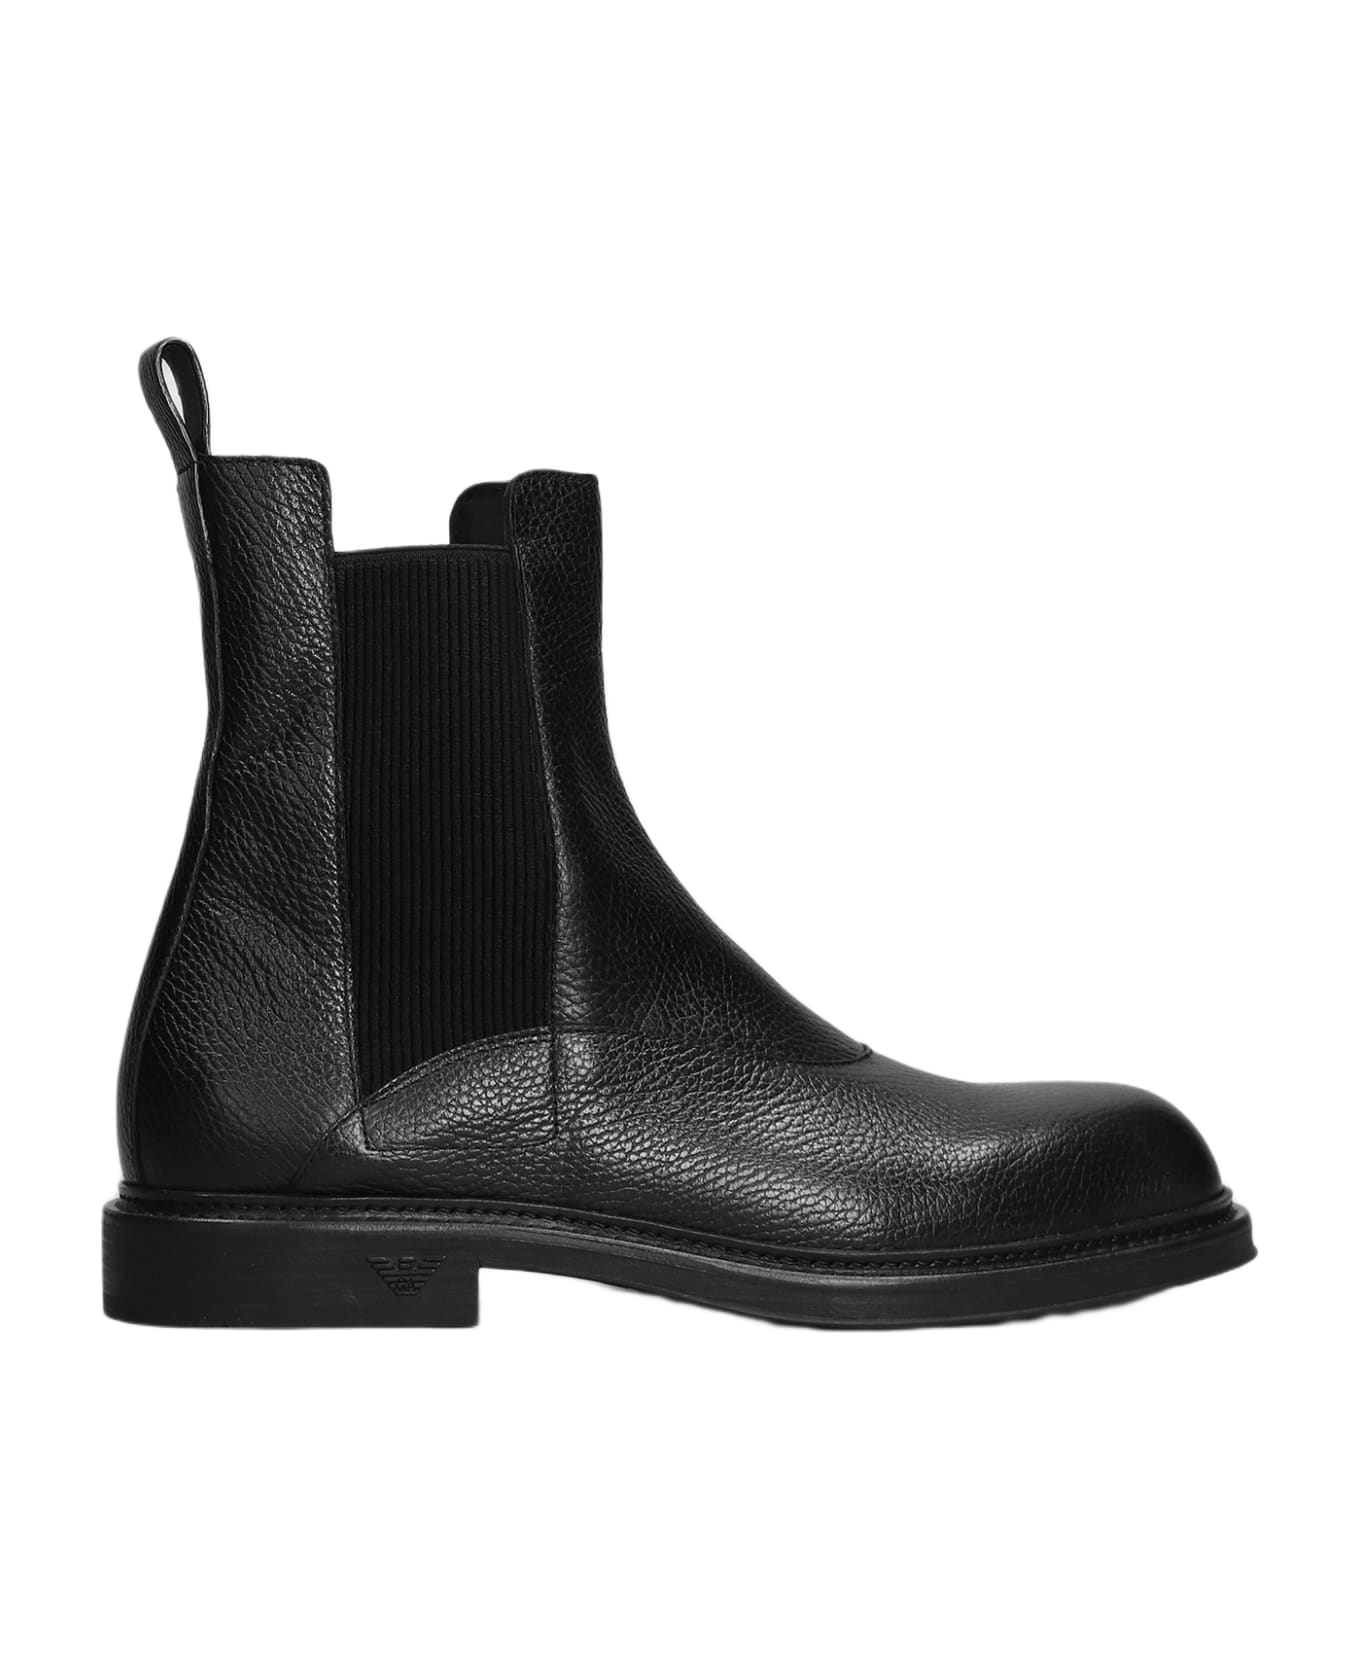 Emporio Armani Ankle Boots In Black Leather - black